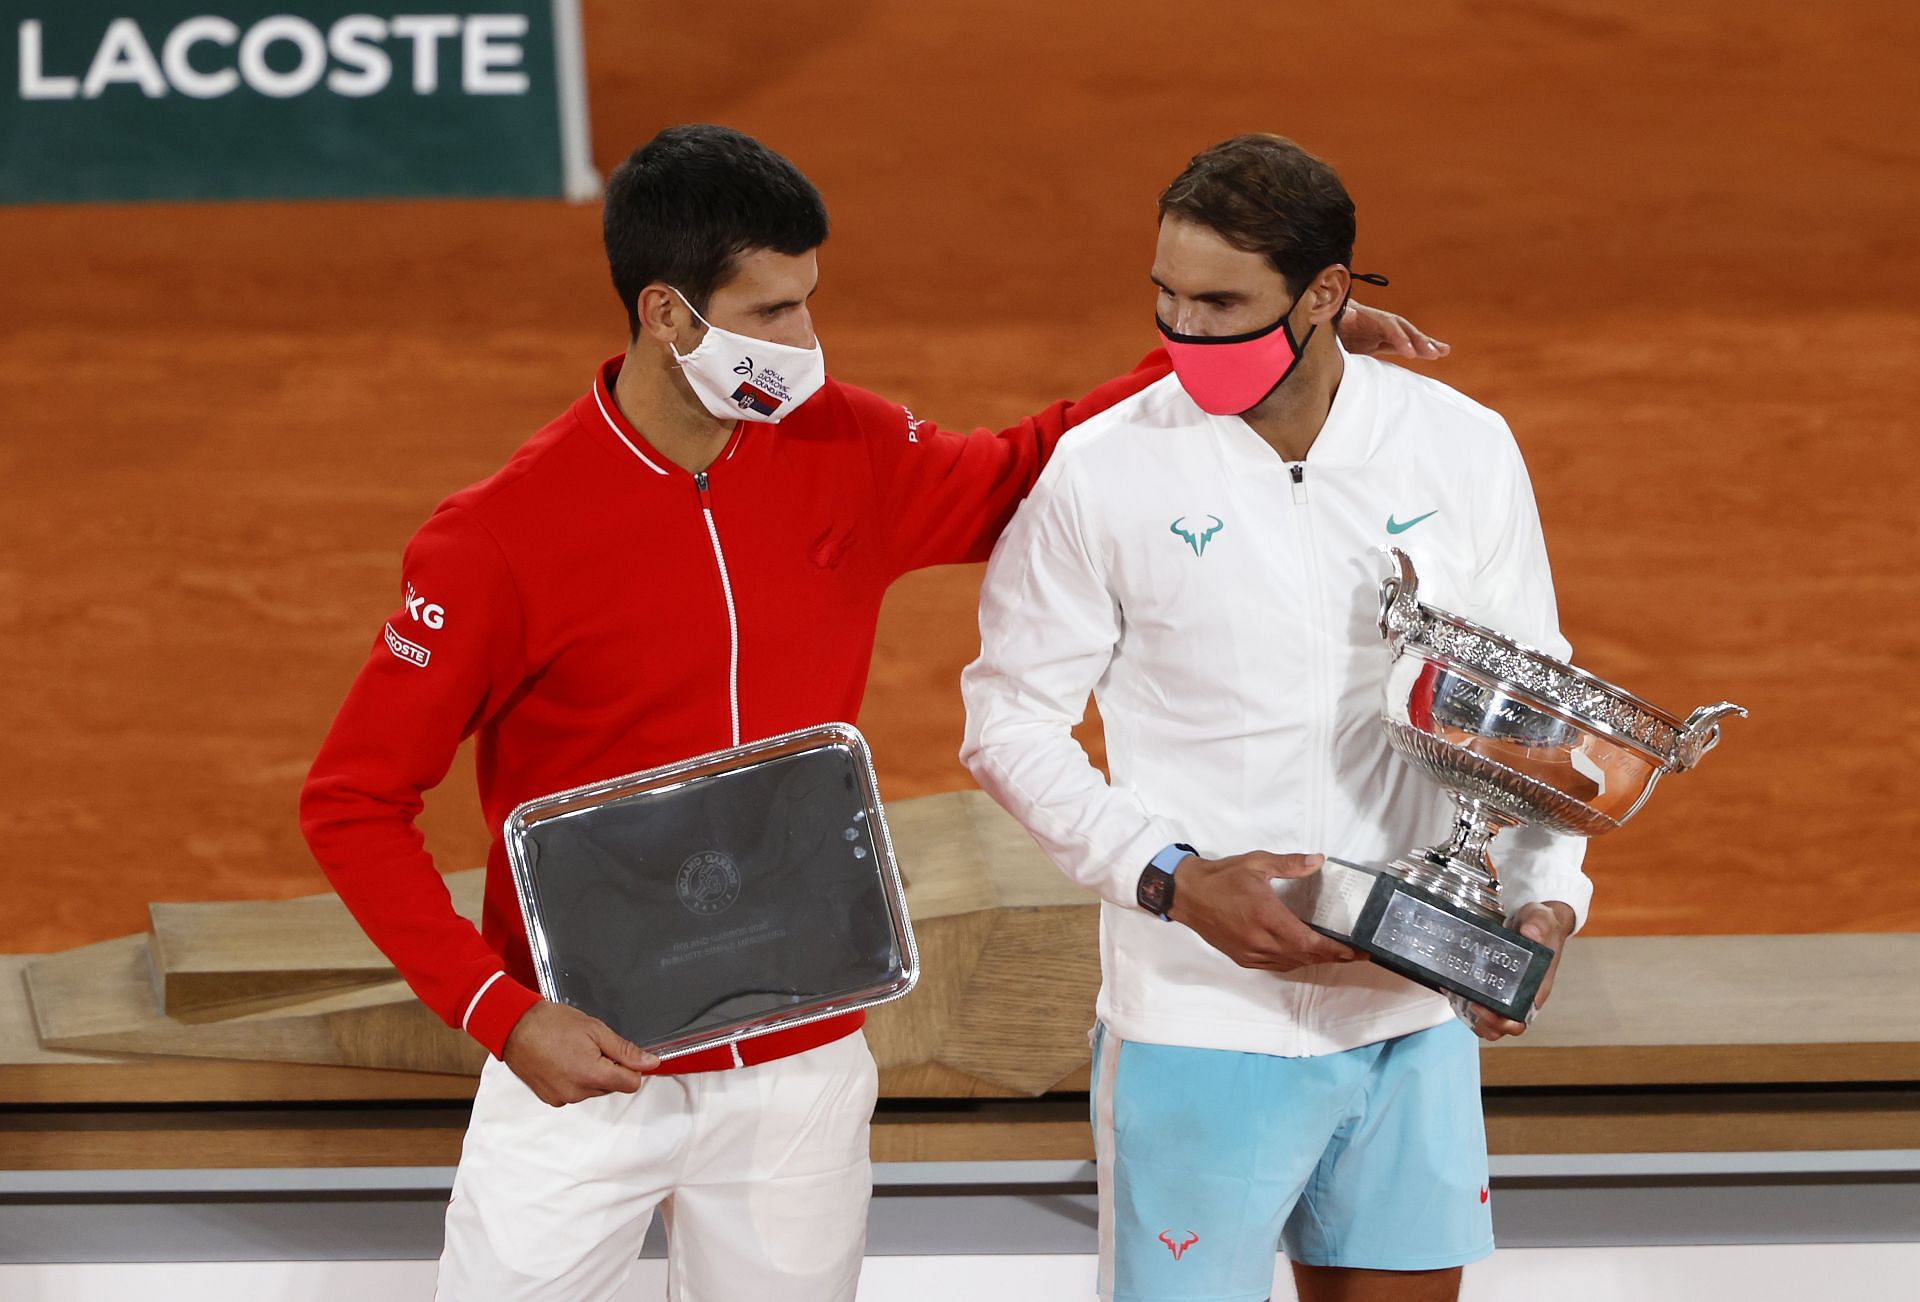 Rafael Nadal is much better at clay than Roger Federer when facing off against the Serb